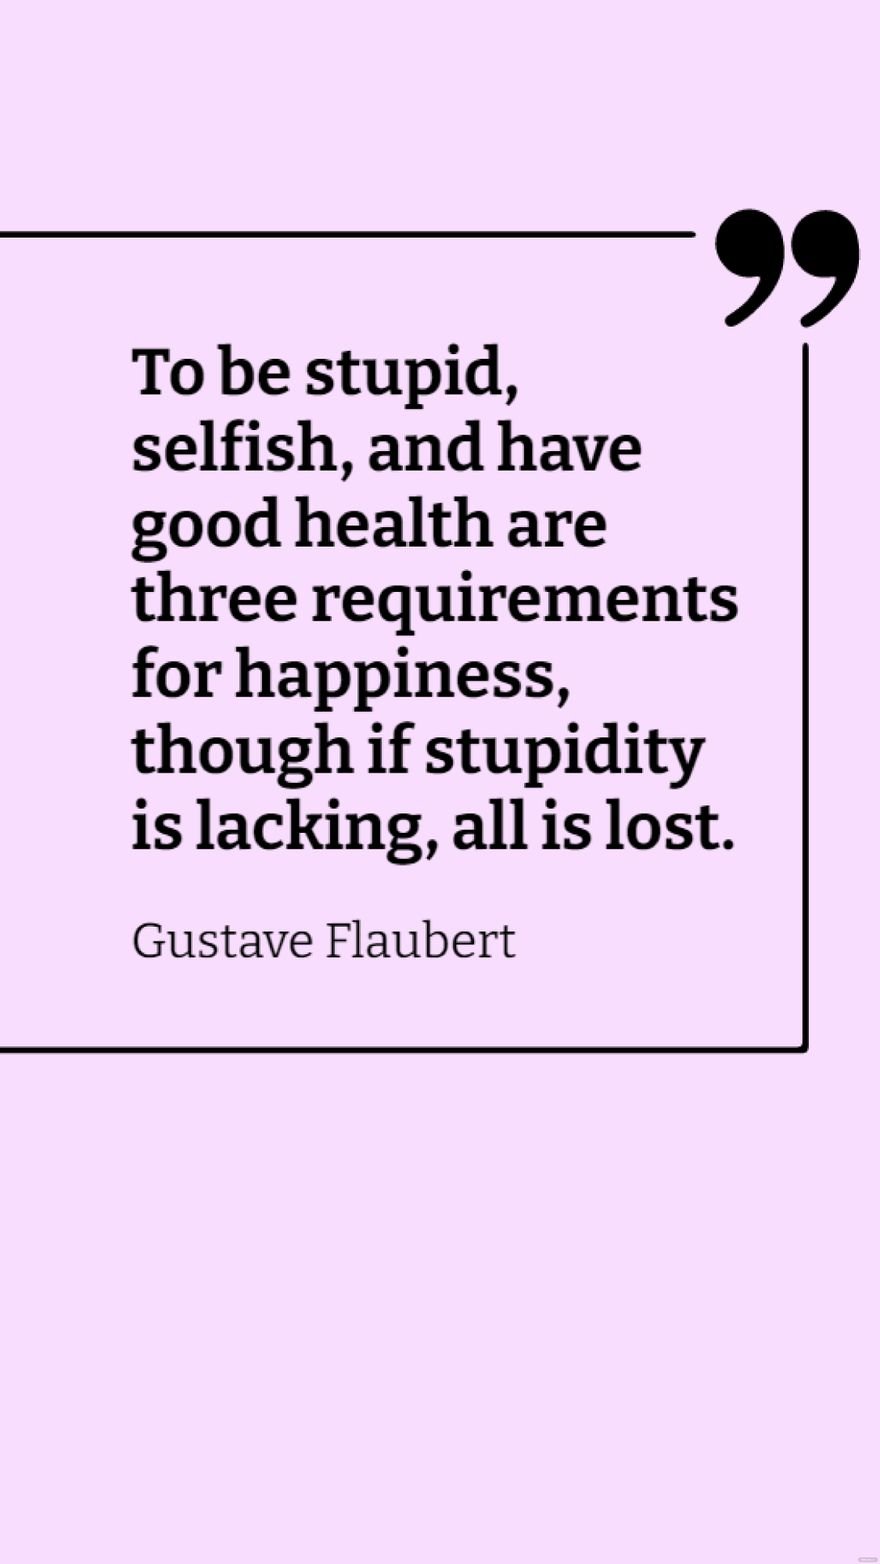 Gustave Flaubert - To be stupid, selfish, and have good health are three requirements for happiness, though if stupidity is lacking, all is lost.